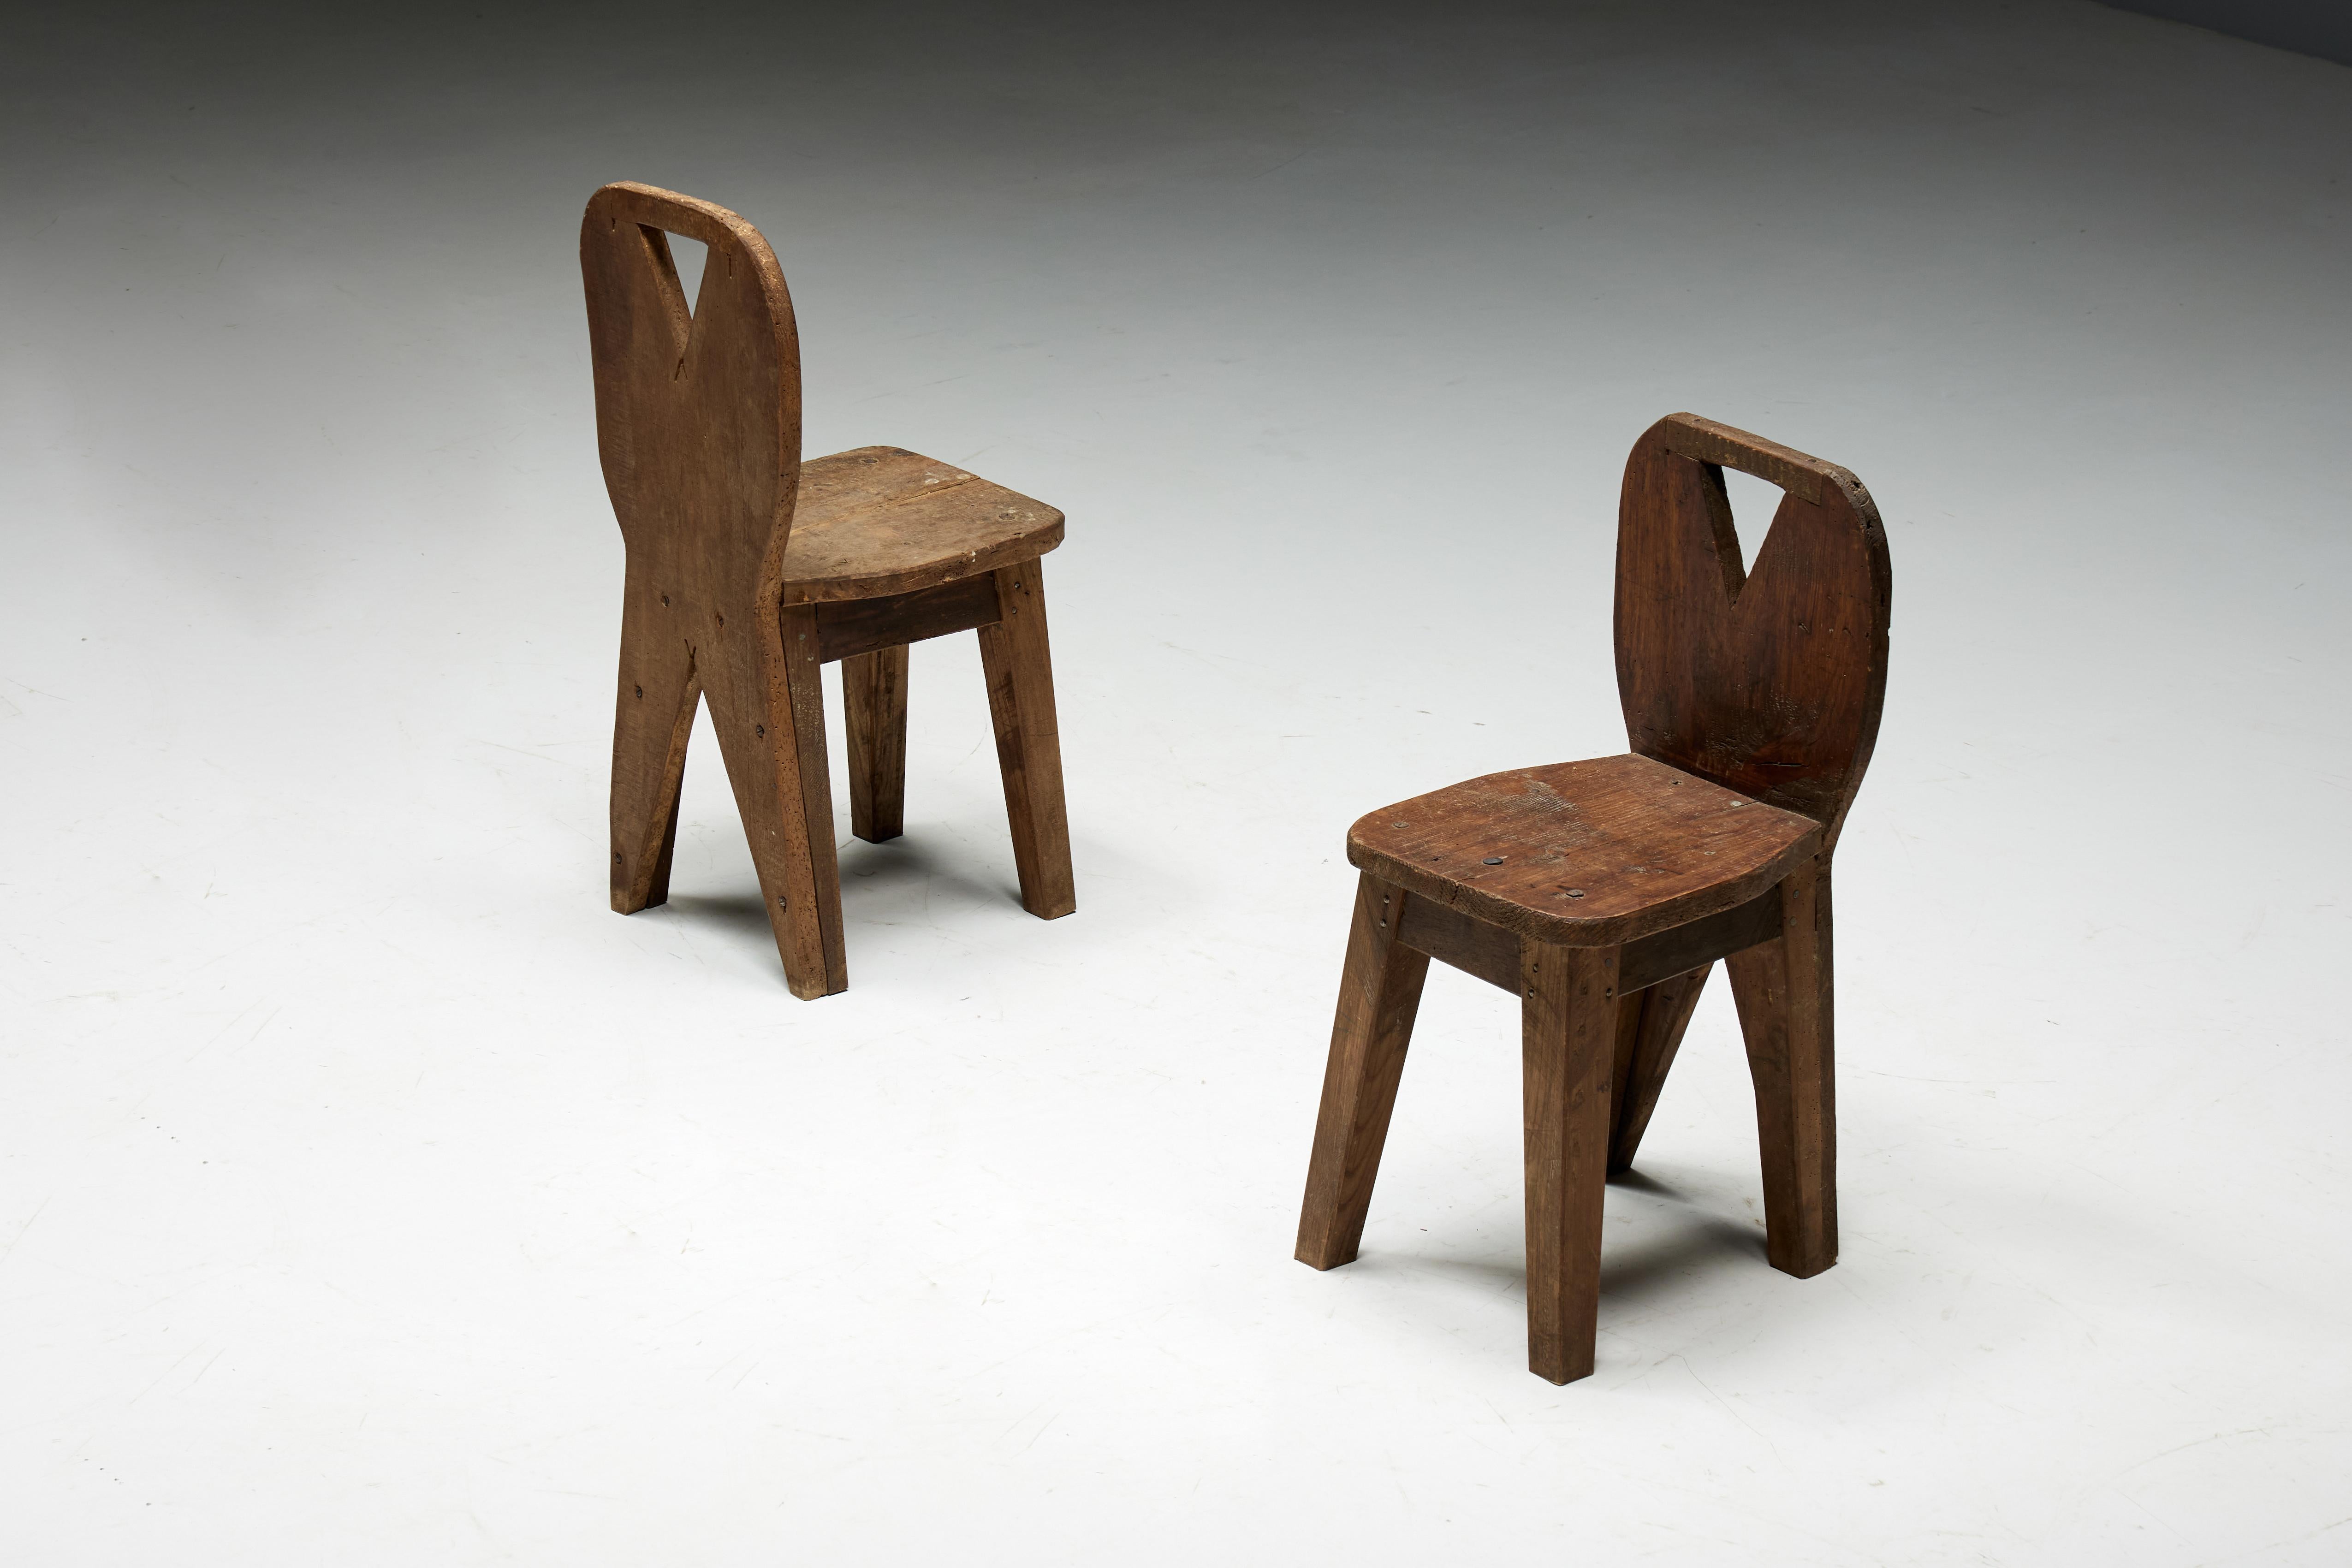 Brutalist Art Populaire Mountain Chairs, France, 1950s For Sale 2